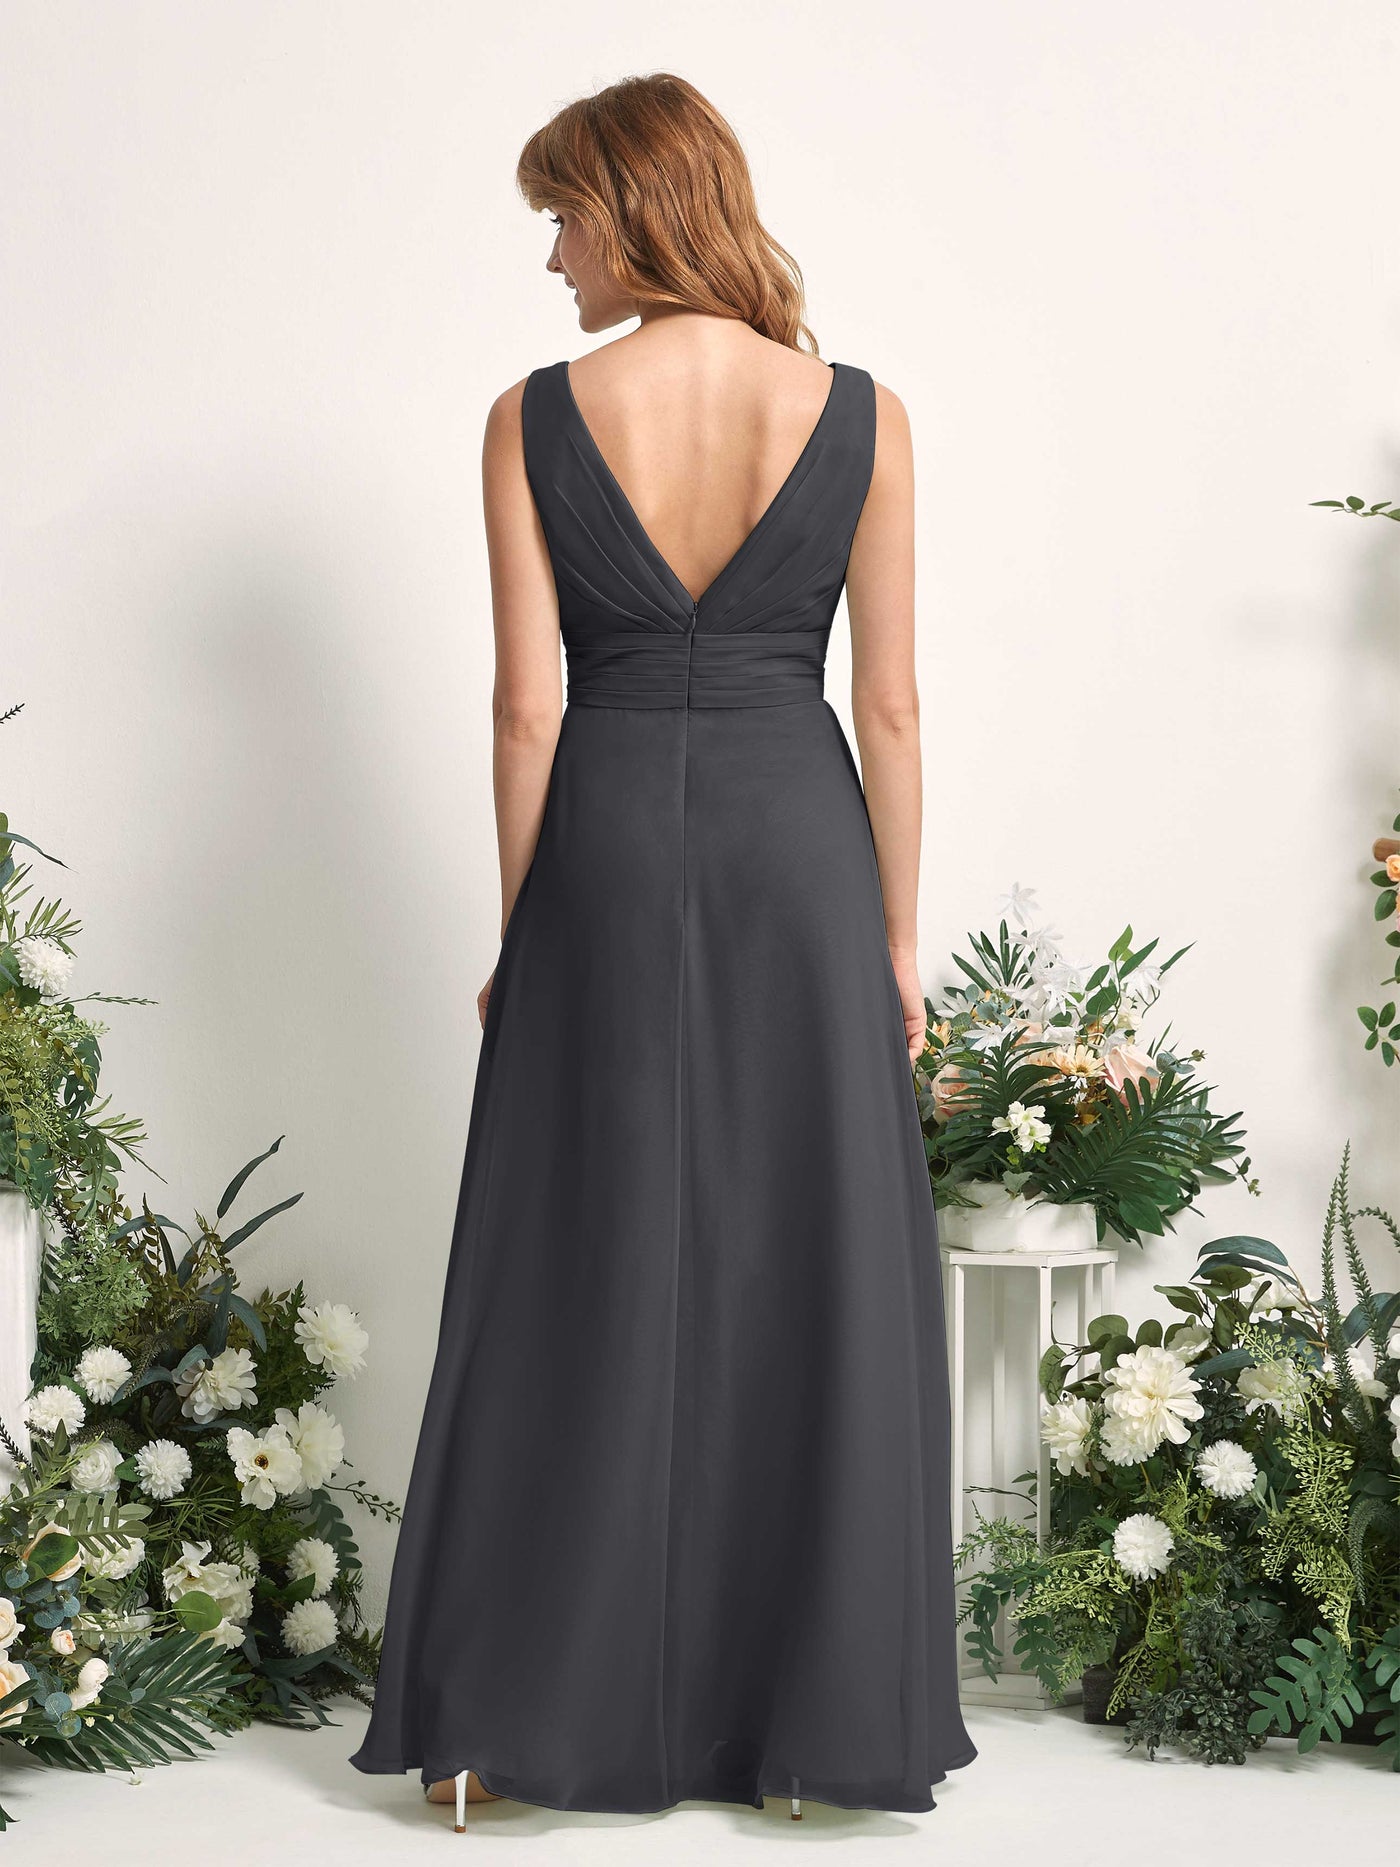 Bridesmaid Dress A-line Chiffon V-neck Full Length Sleeveless Wedding Party Dress - Pewter (81227138)#color_pewter